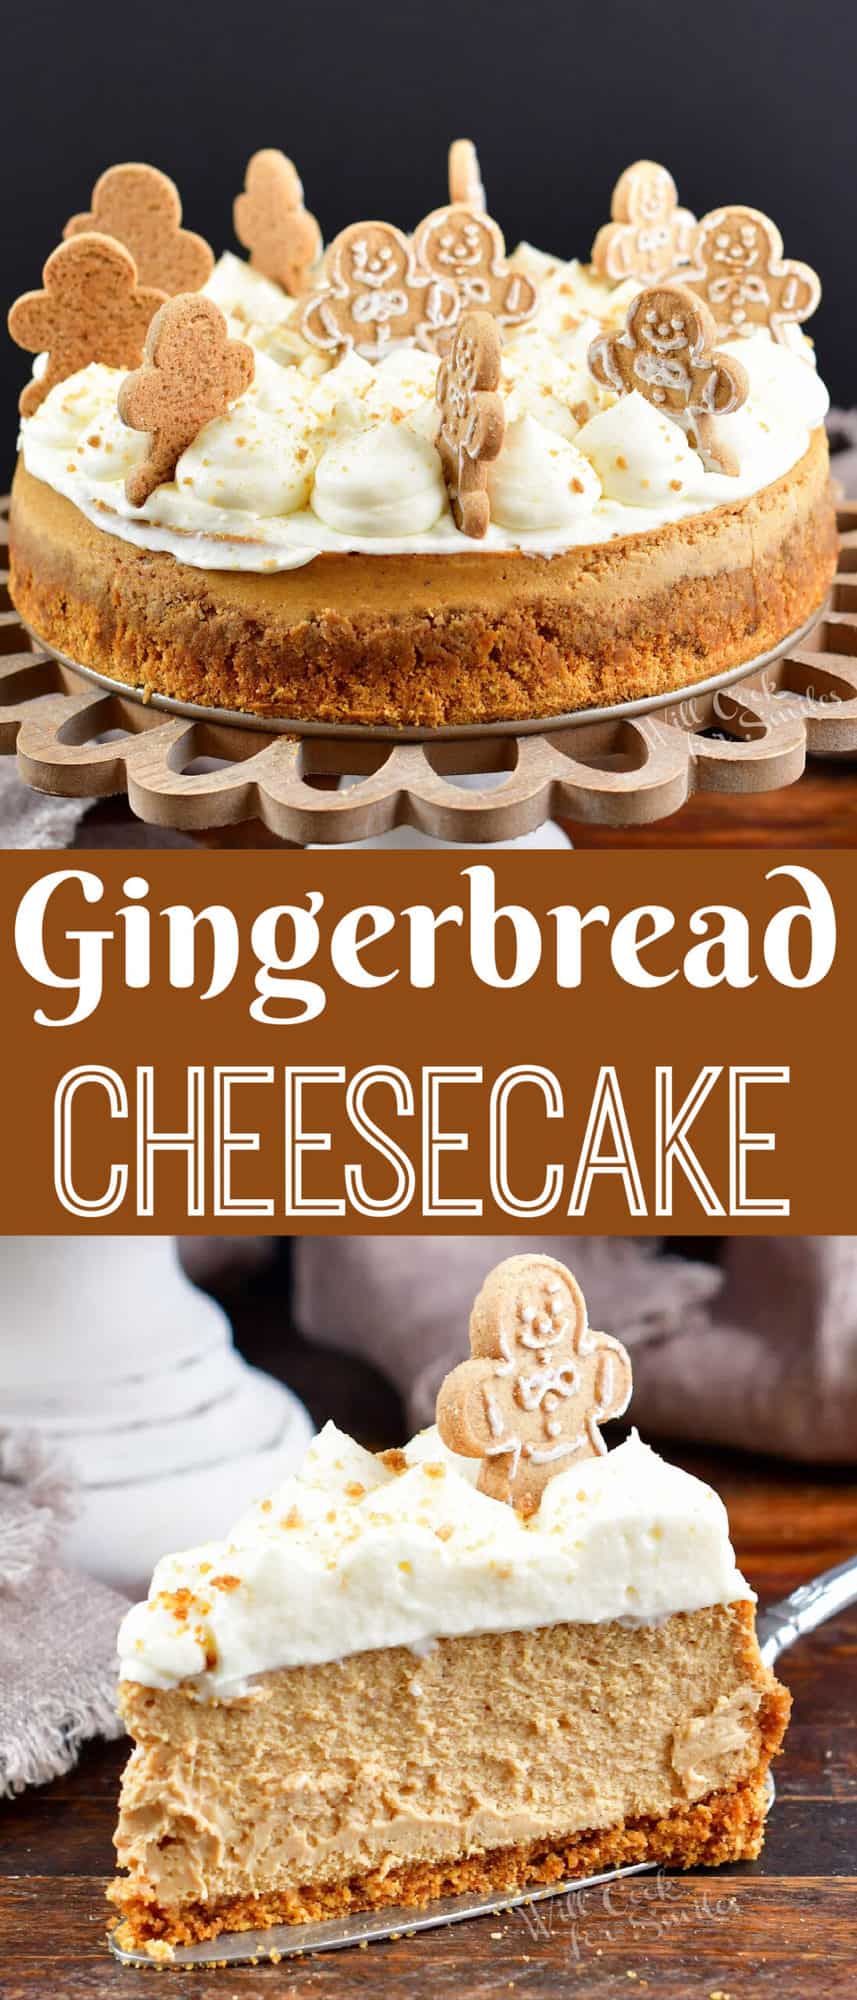 collage of two closeup images of gingerbread cheesecake and title